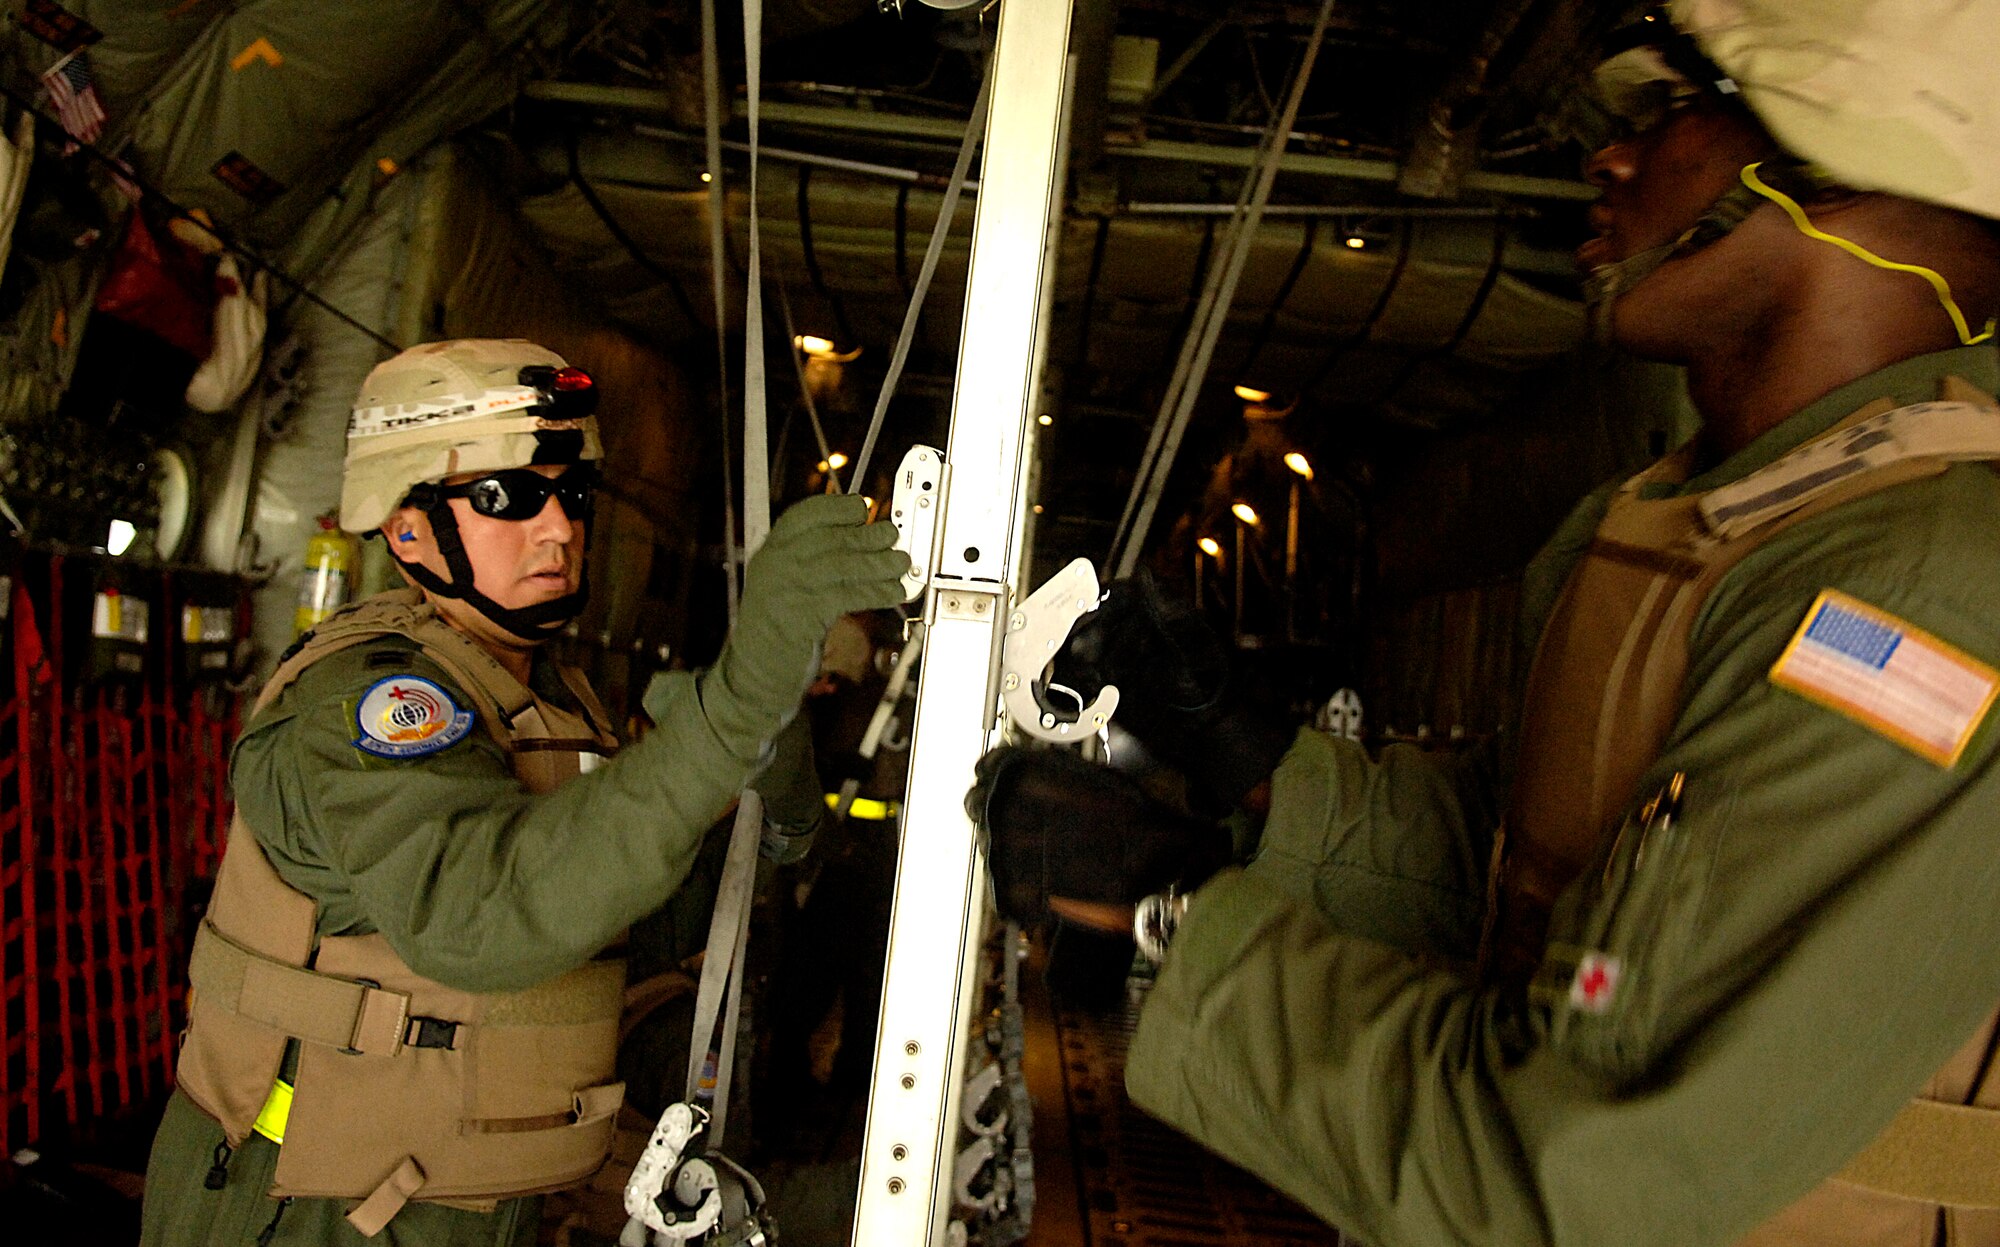 Capt. John Camacho-Ayala and Tech. Sgt. Kermit McLauchin configure a C-130 Hercules during a aeromedical evacuation competition July 23 for Air Mobility Command's Rodeo 2007 at McChord Air Force Base, Wash. Captain Camacho-Ayala is a flight nurse and Sergeant McLauchin is a medical technician with the 375th Aeromedical Evacuation Squadron at Scott AFB, Ill. (U.S. Air Force photo/Tech. Sgt. Jeremy T. Lock)
